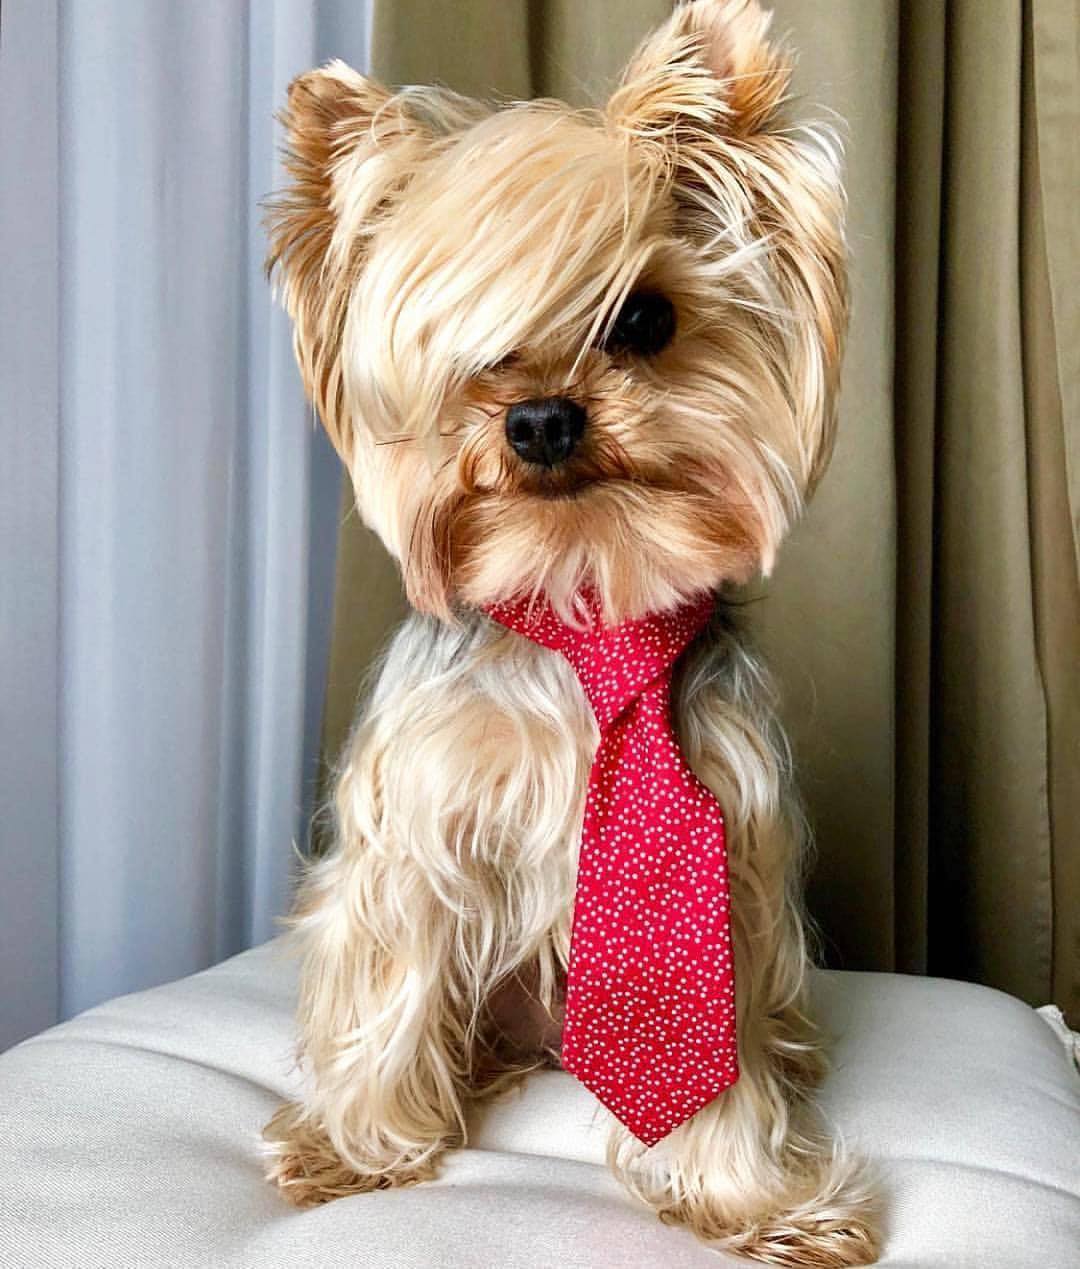 Yorkshire Terrier with a side bangs and wearing a necktie sitting on top of its bed